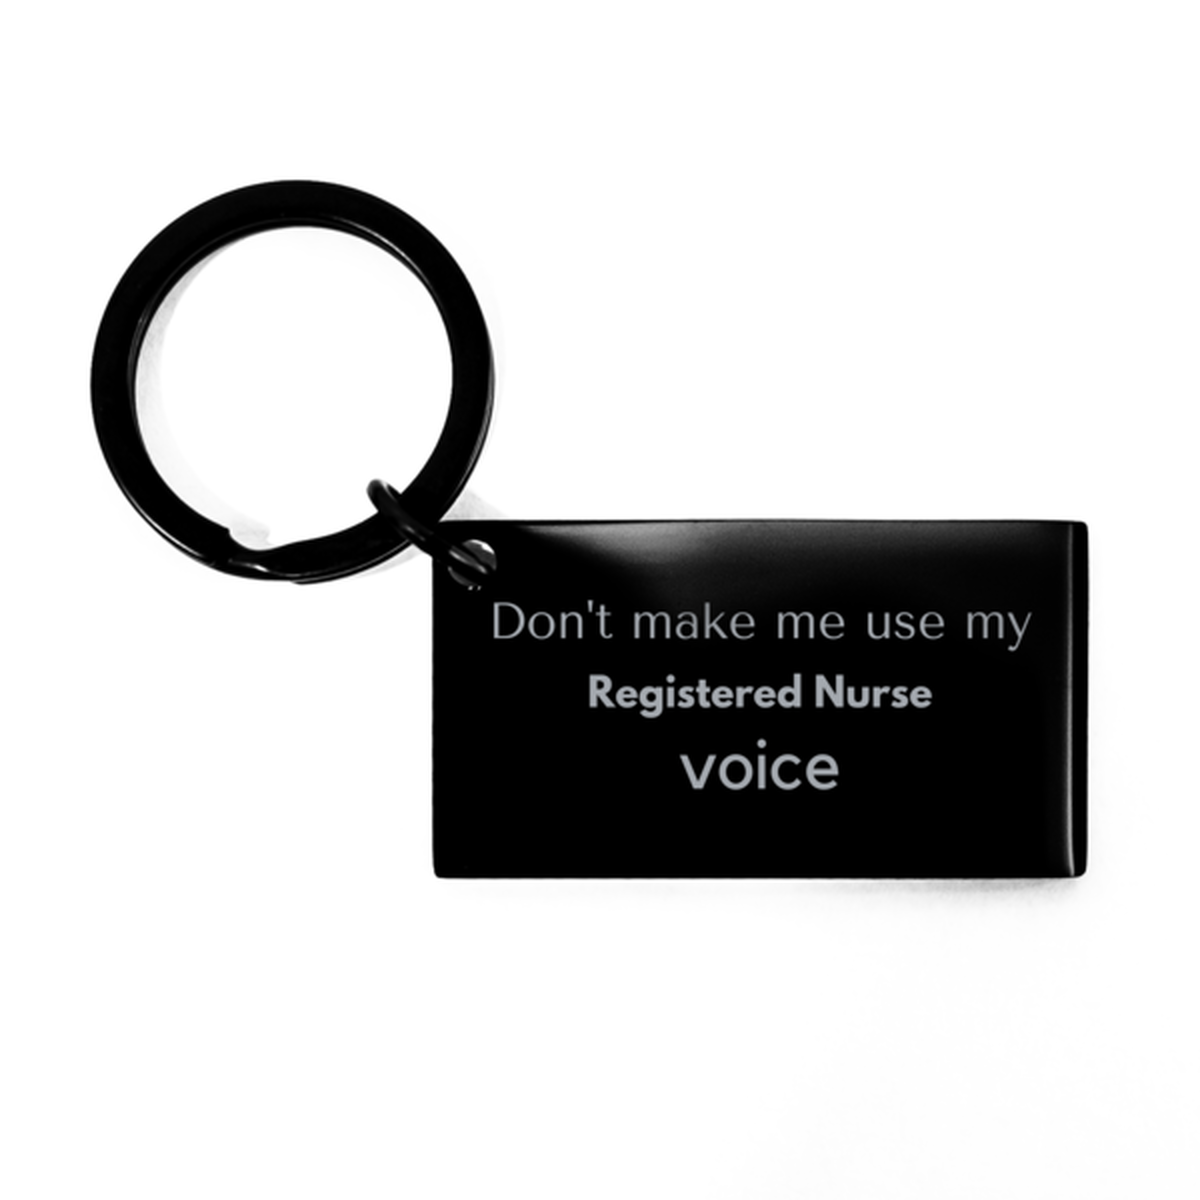 Don't make me use my Registered Nurse voice, Sarcasm Registered Nurse Gifts, Christmas Registered Nurse Keychain Birthday Unique Gifts For Registered Nurse Coworkers, Men, Women, Colleague, Friends